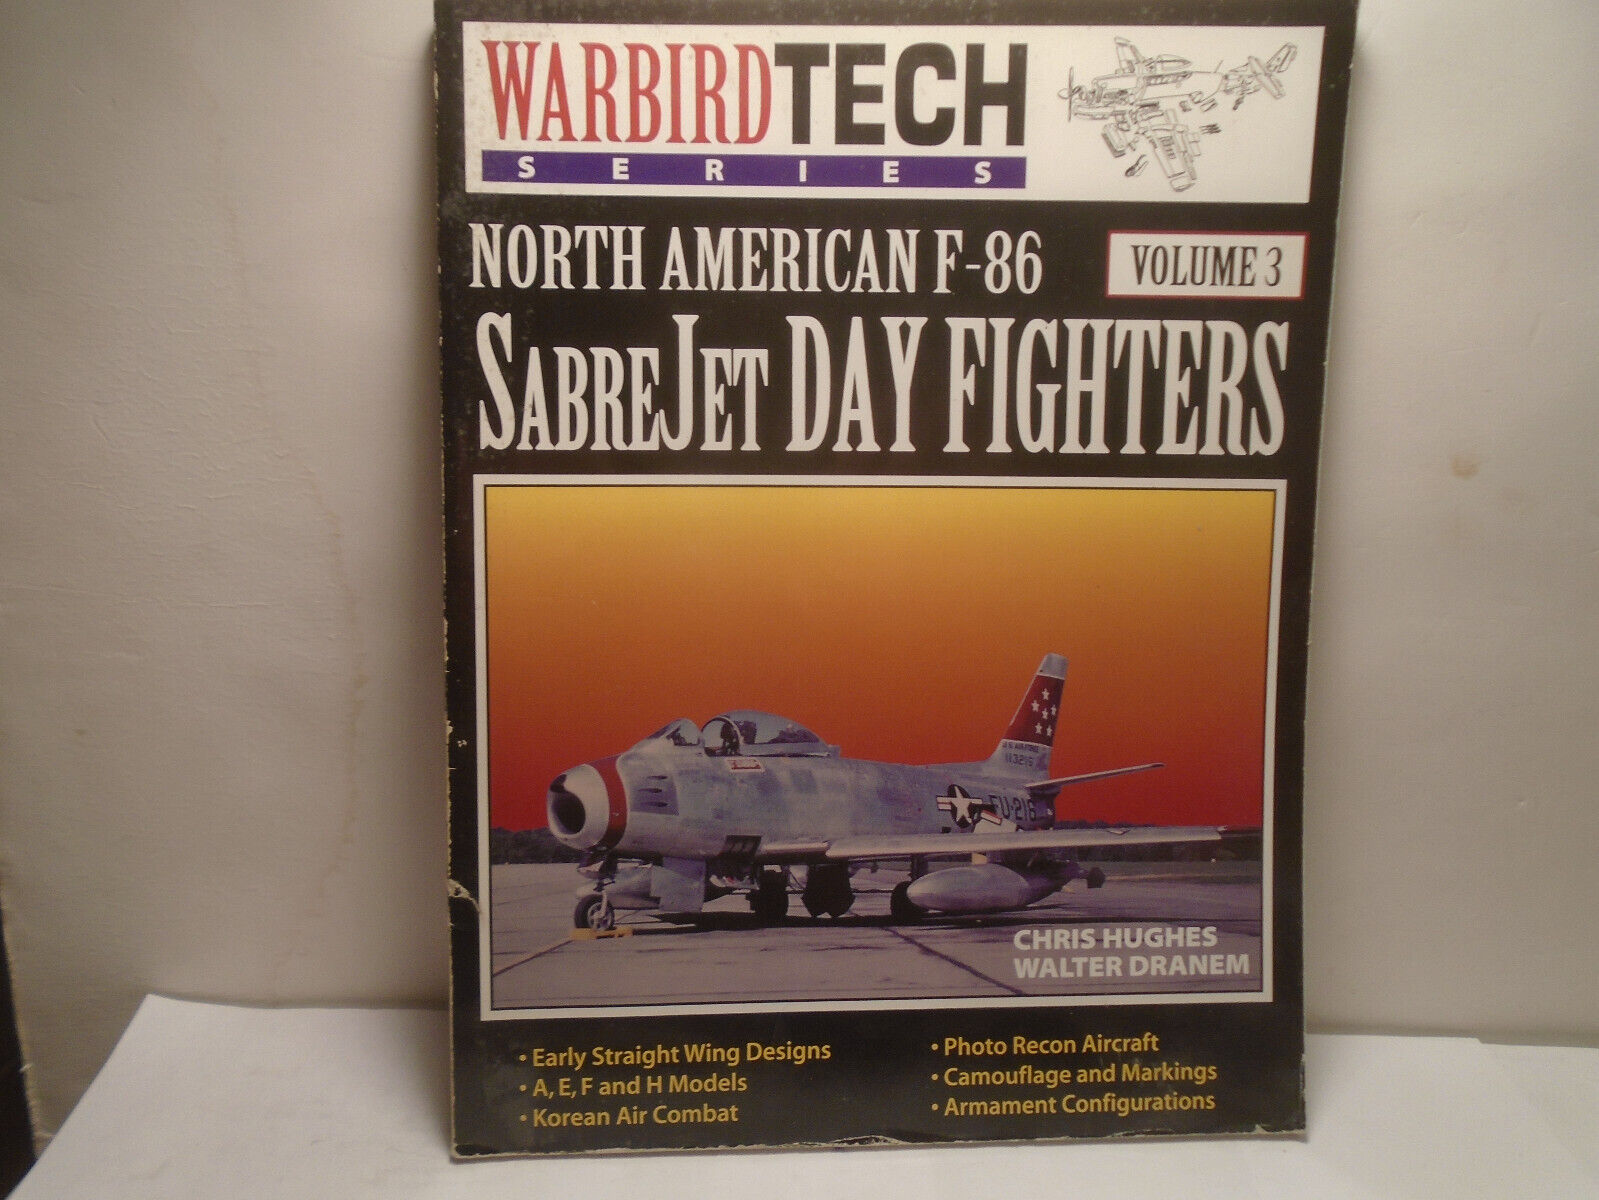 WARBIRD TECH SERIES VOL.3 NORTH AMERICAN F-86 SABREJET DAY FIGHTERS